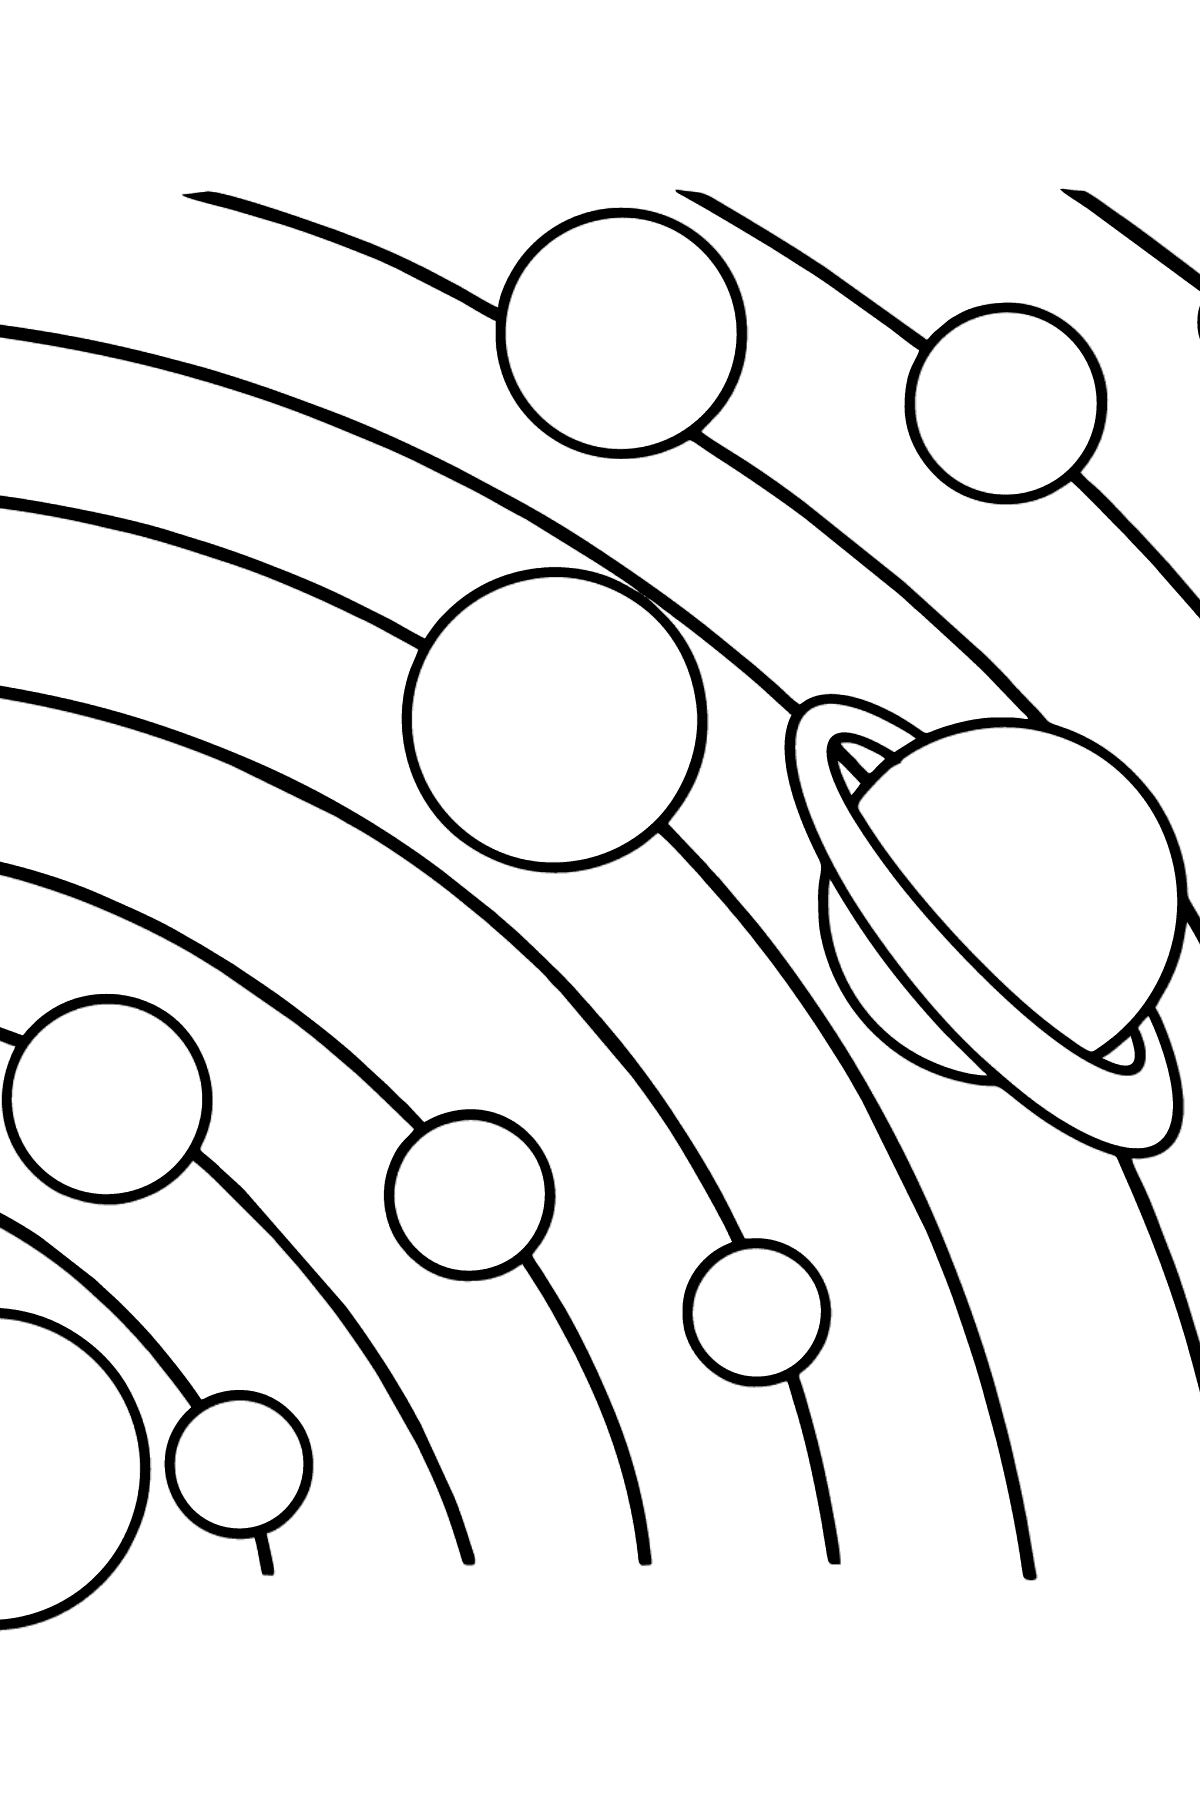 Solar System - Simple coloring page - Coloring Pages for Kids